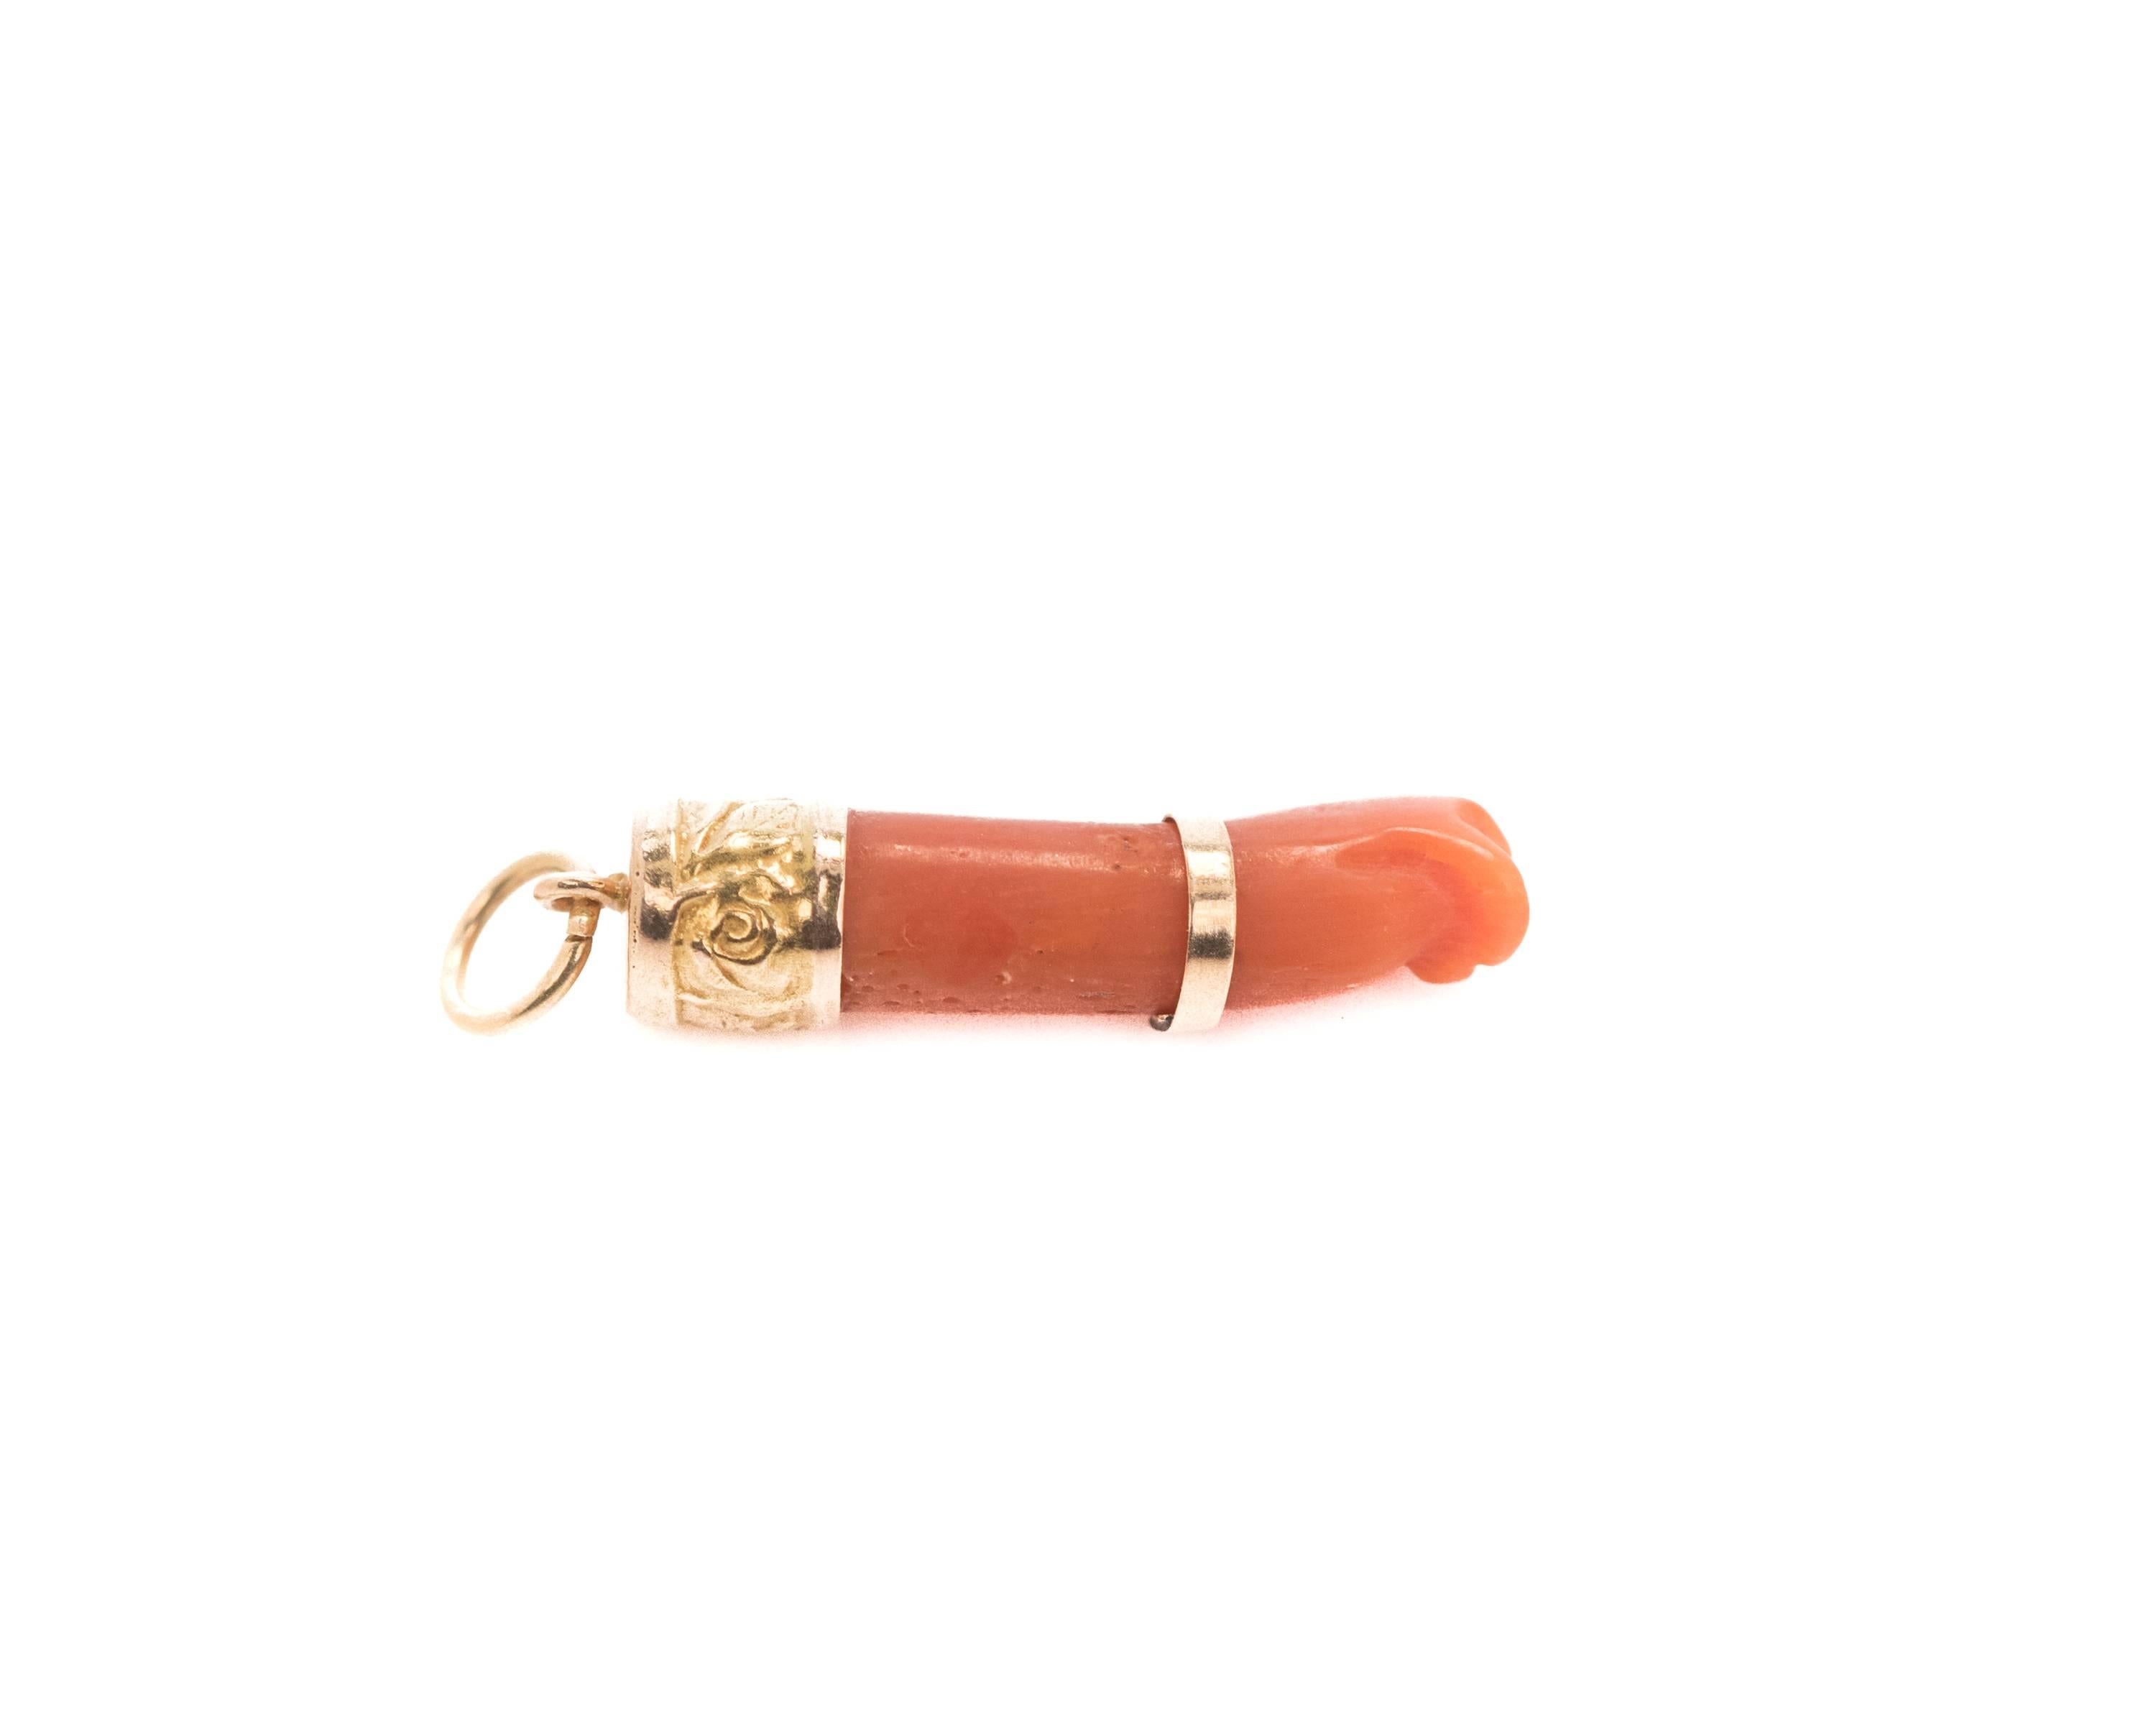 1950s Retro Figa Charm - 18K Yellow Gold, Coral

Features a beautiful orange-red coral arm and hand. A band of rich, high polish 18 Karat Yellow Gold forms a bracelet on the wrist. The end is capped in 18 Karat Yellow Gold. The cap is embellished